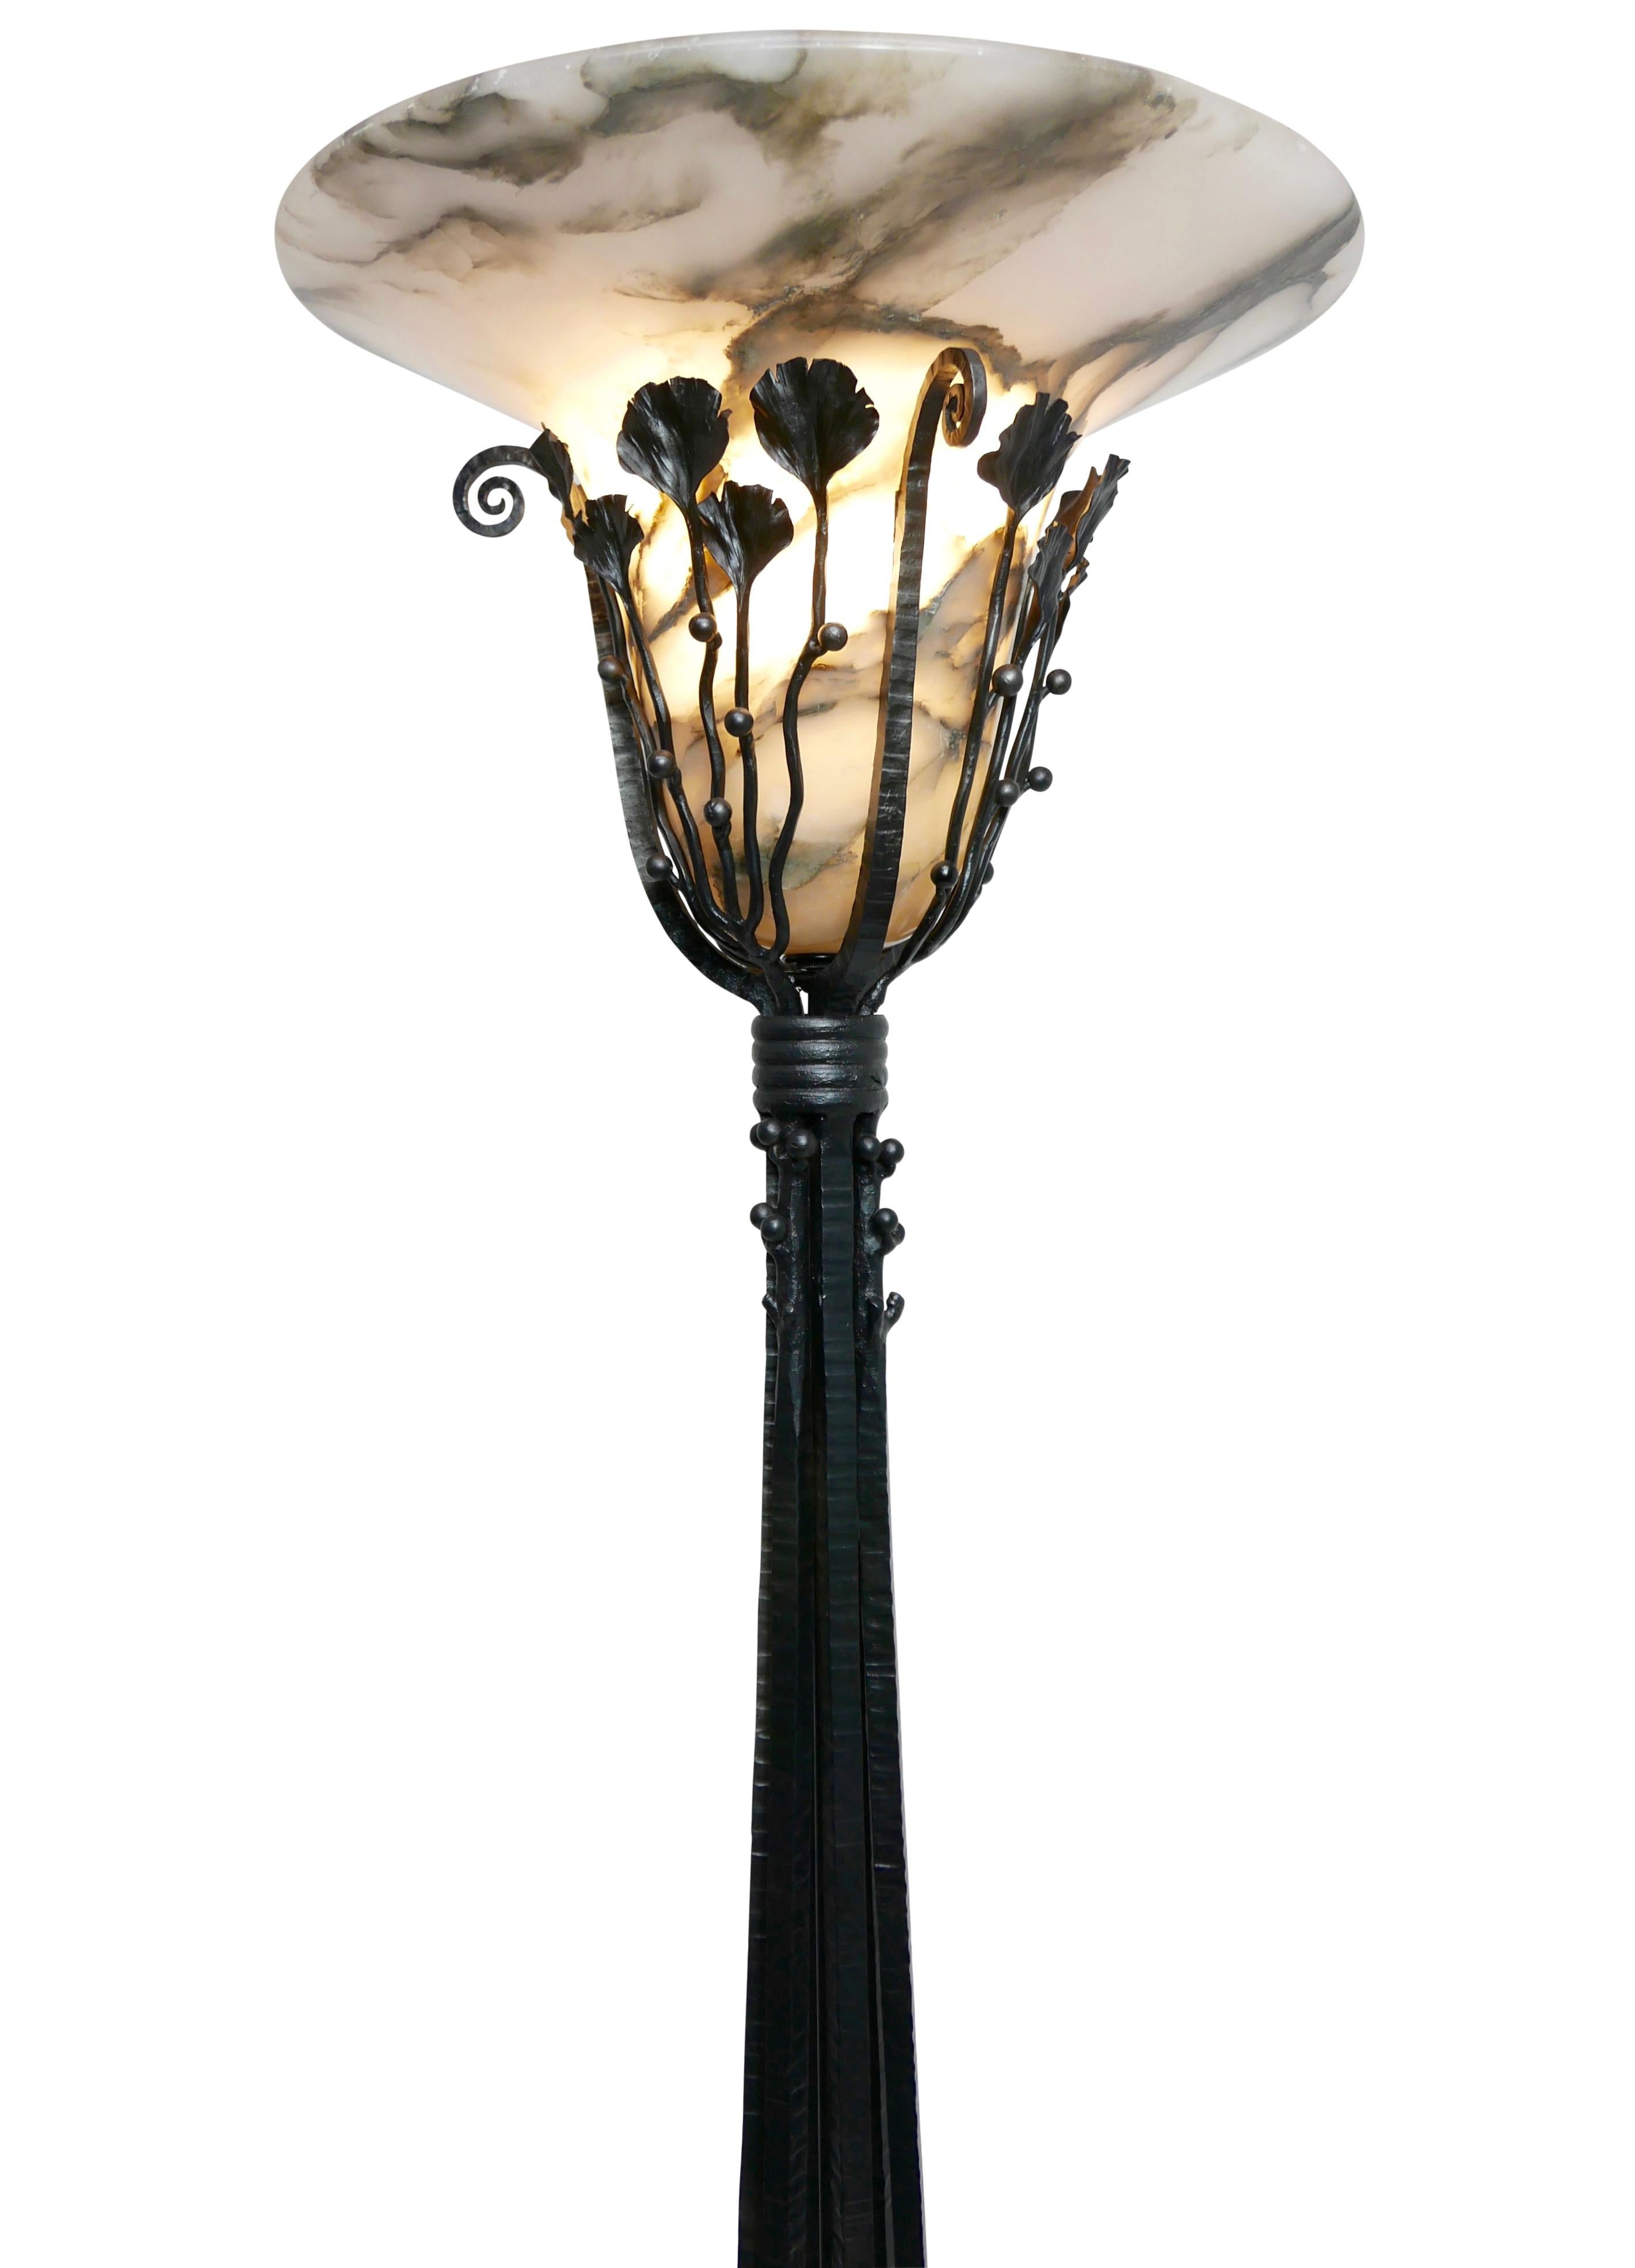 Art Deco Wrought Iron Floor Lamp with Alabaster Shade, French, circa 1920 For Sale 7